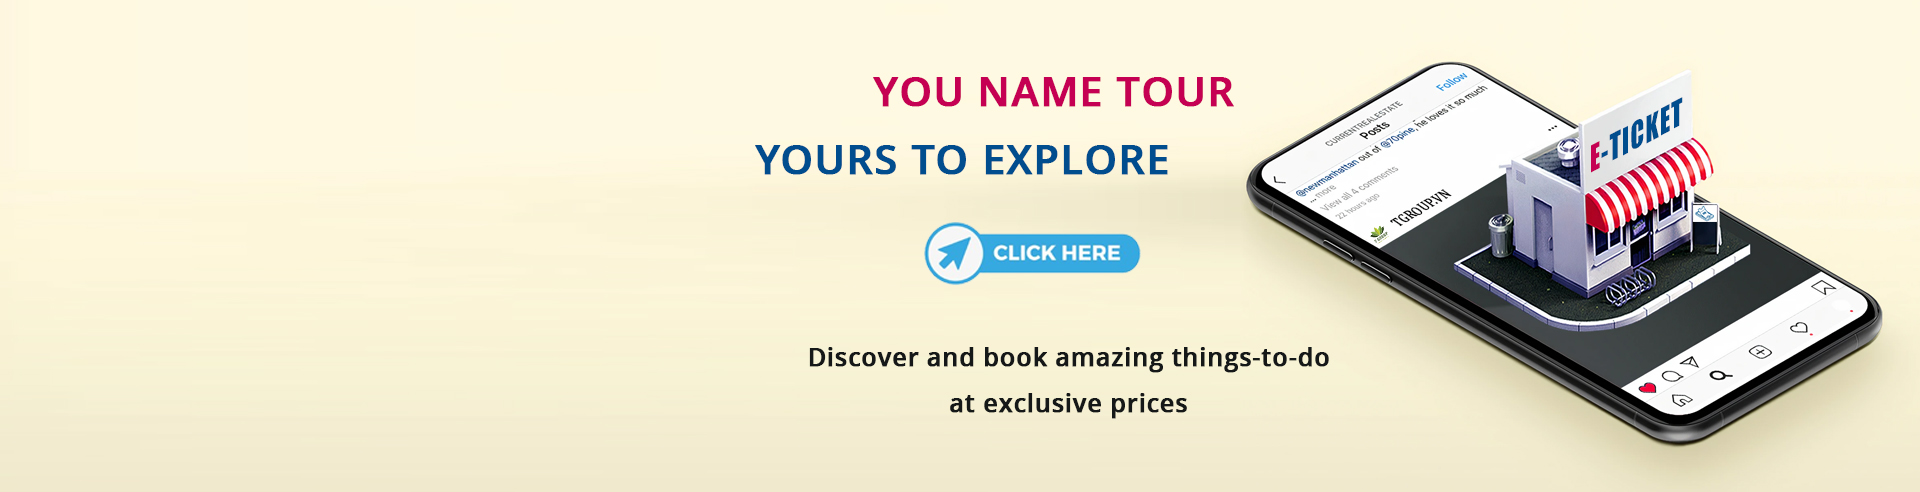 YOU NAME TOUR, YOURS TO EXPLORE